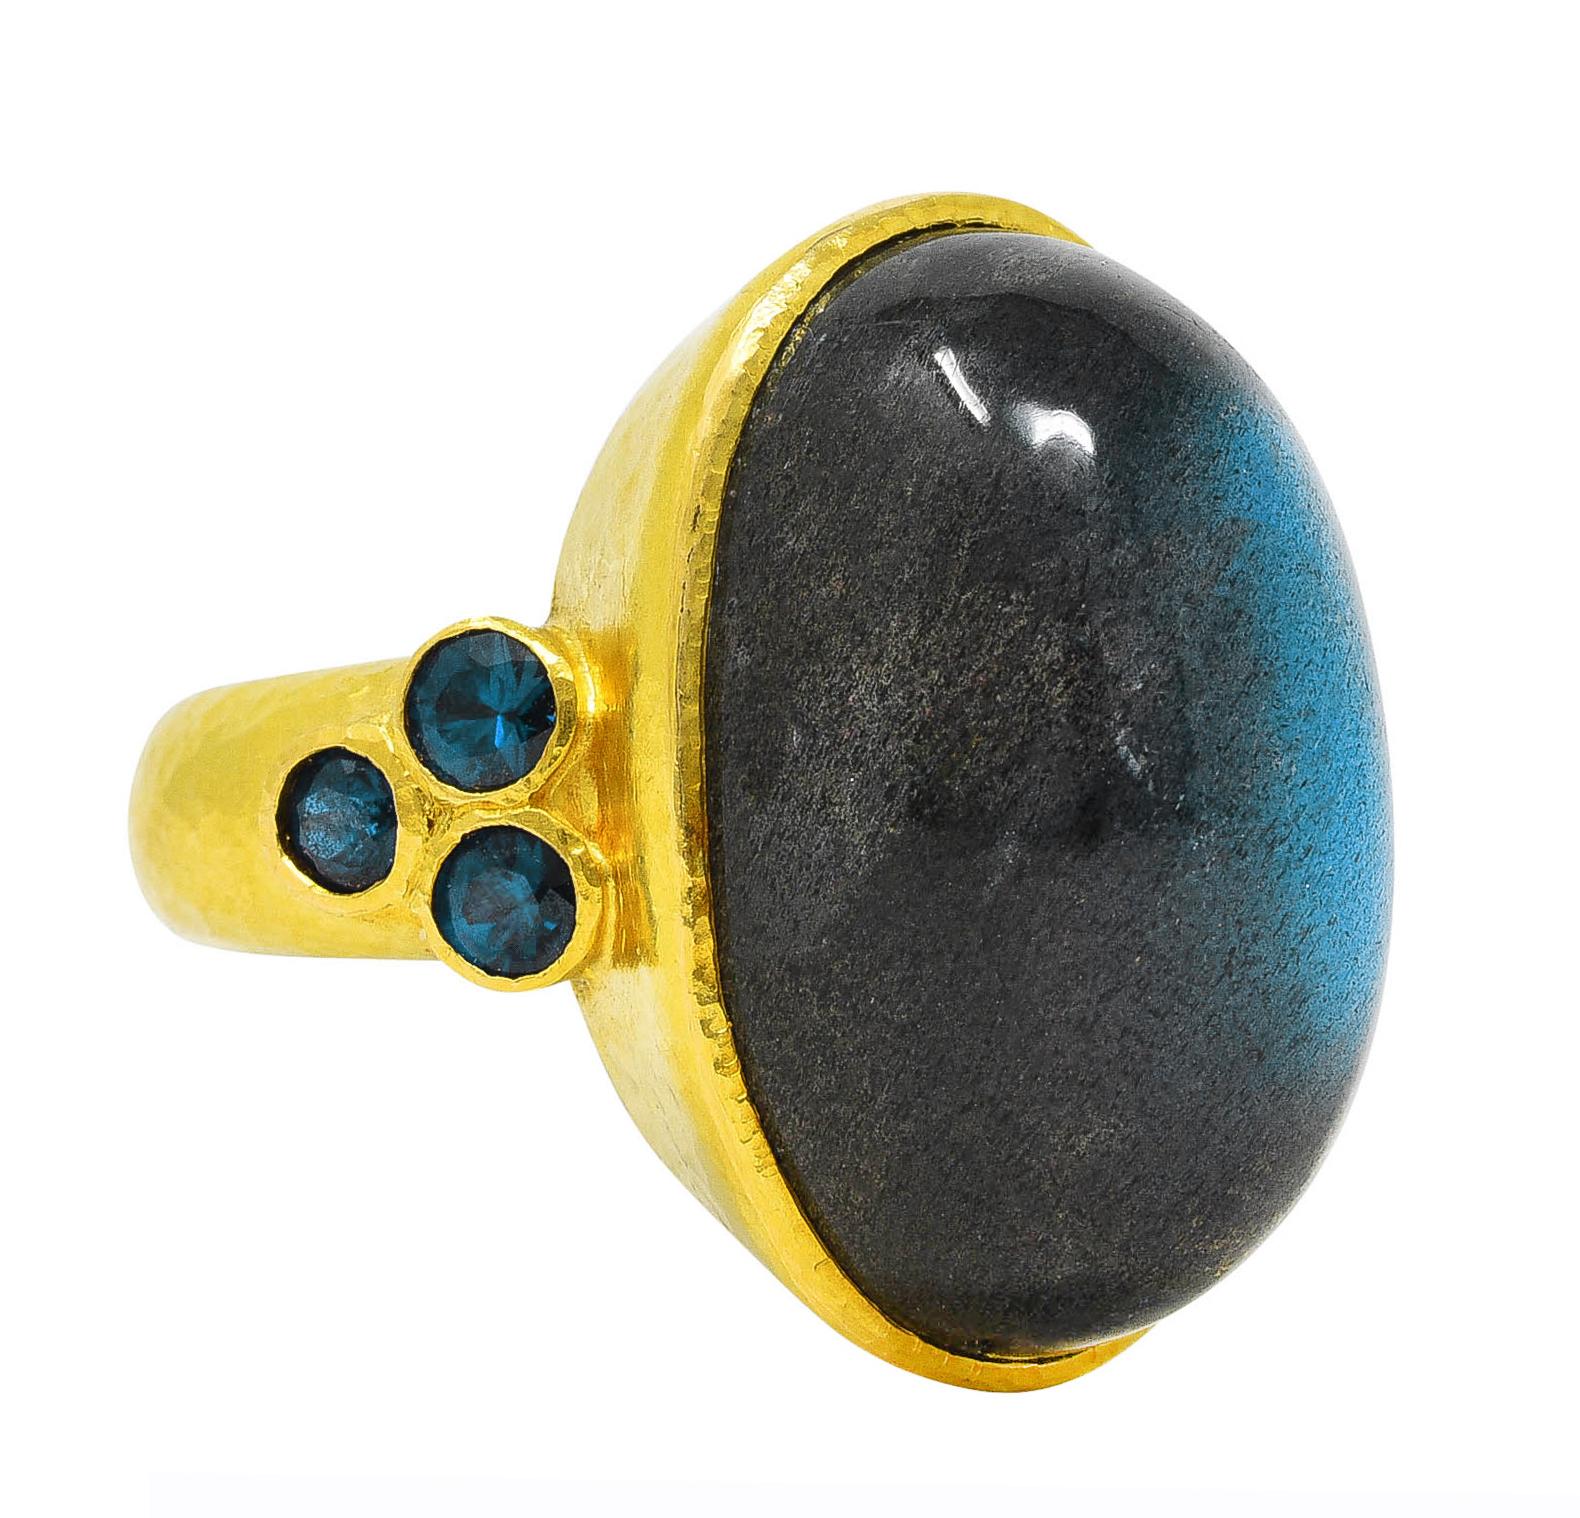 Featuring a substantial oval cabochon of labradorite measuring approximately 23.0 x 14.5 mm

Translucent gray in body color with very strong labradorescence exhibited as a broad blue flash with scintillation

Bezel set in a hammered gold surround